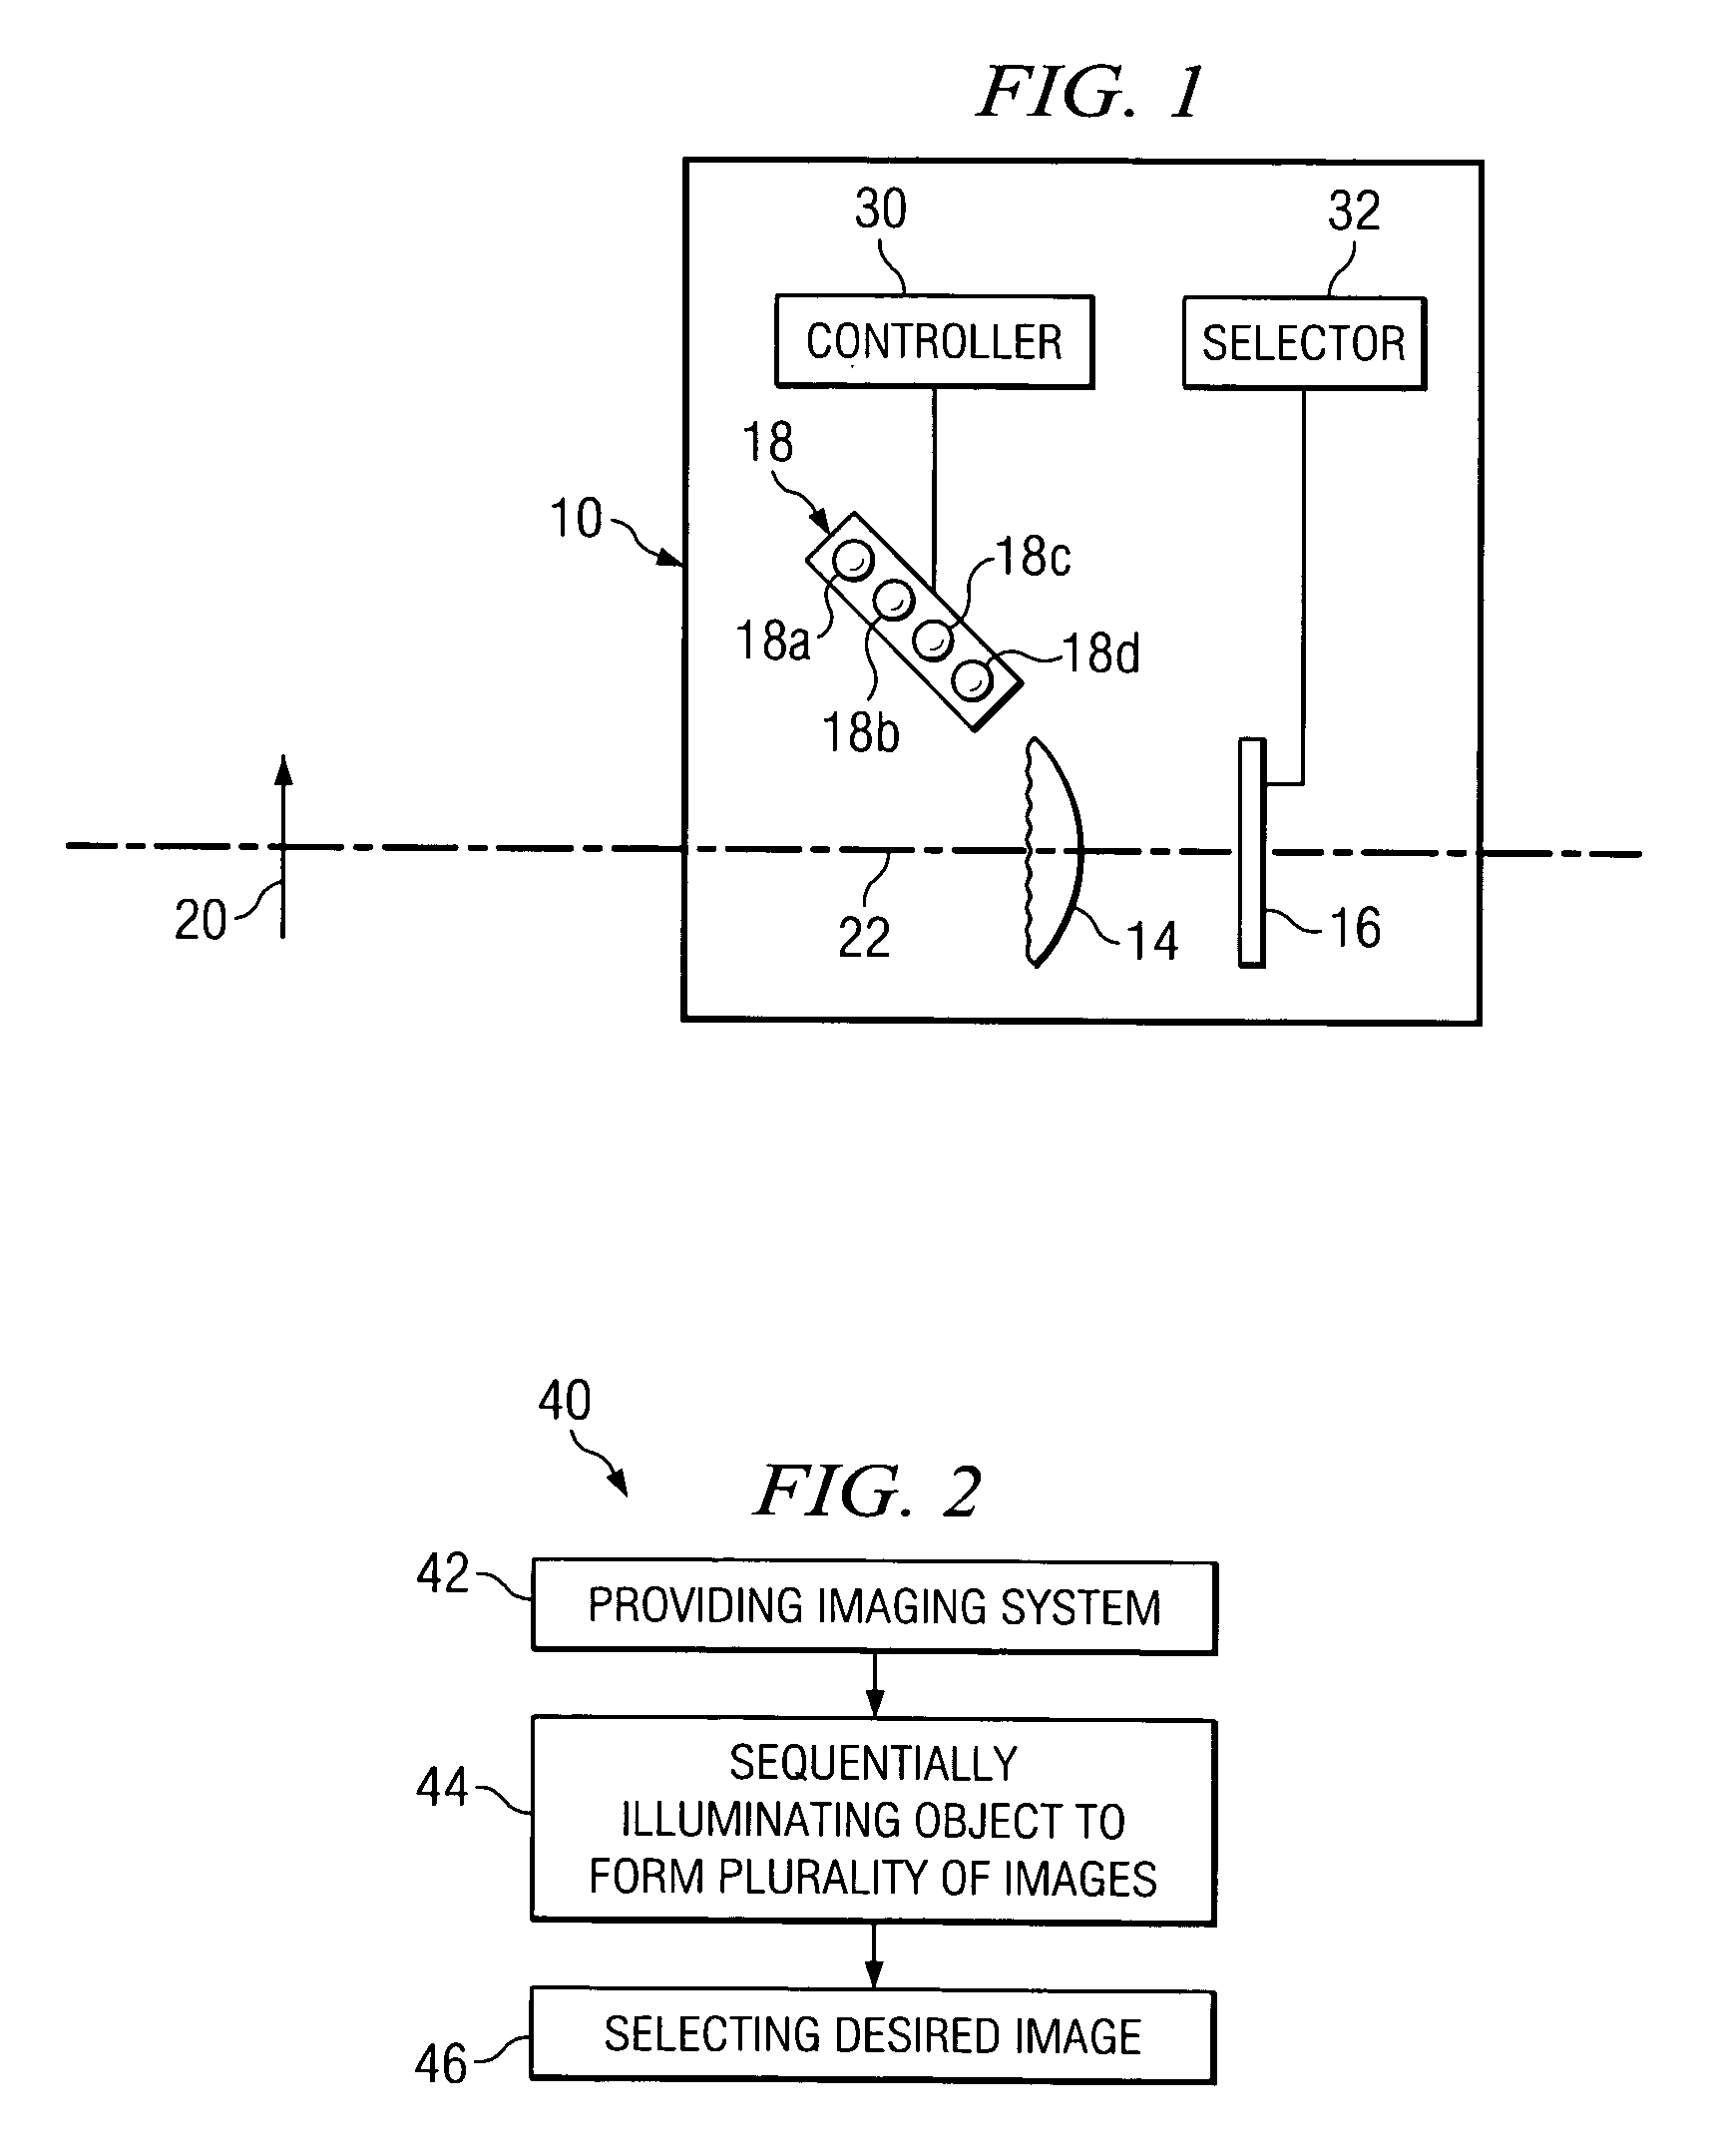 Imaging system with large depth of field